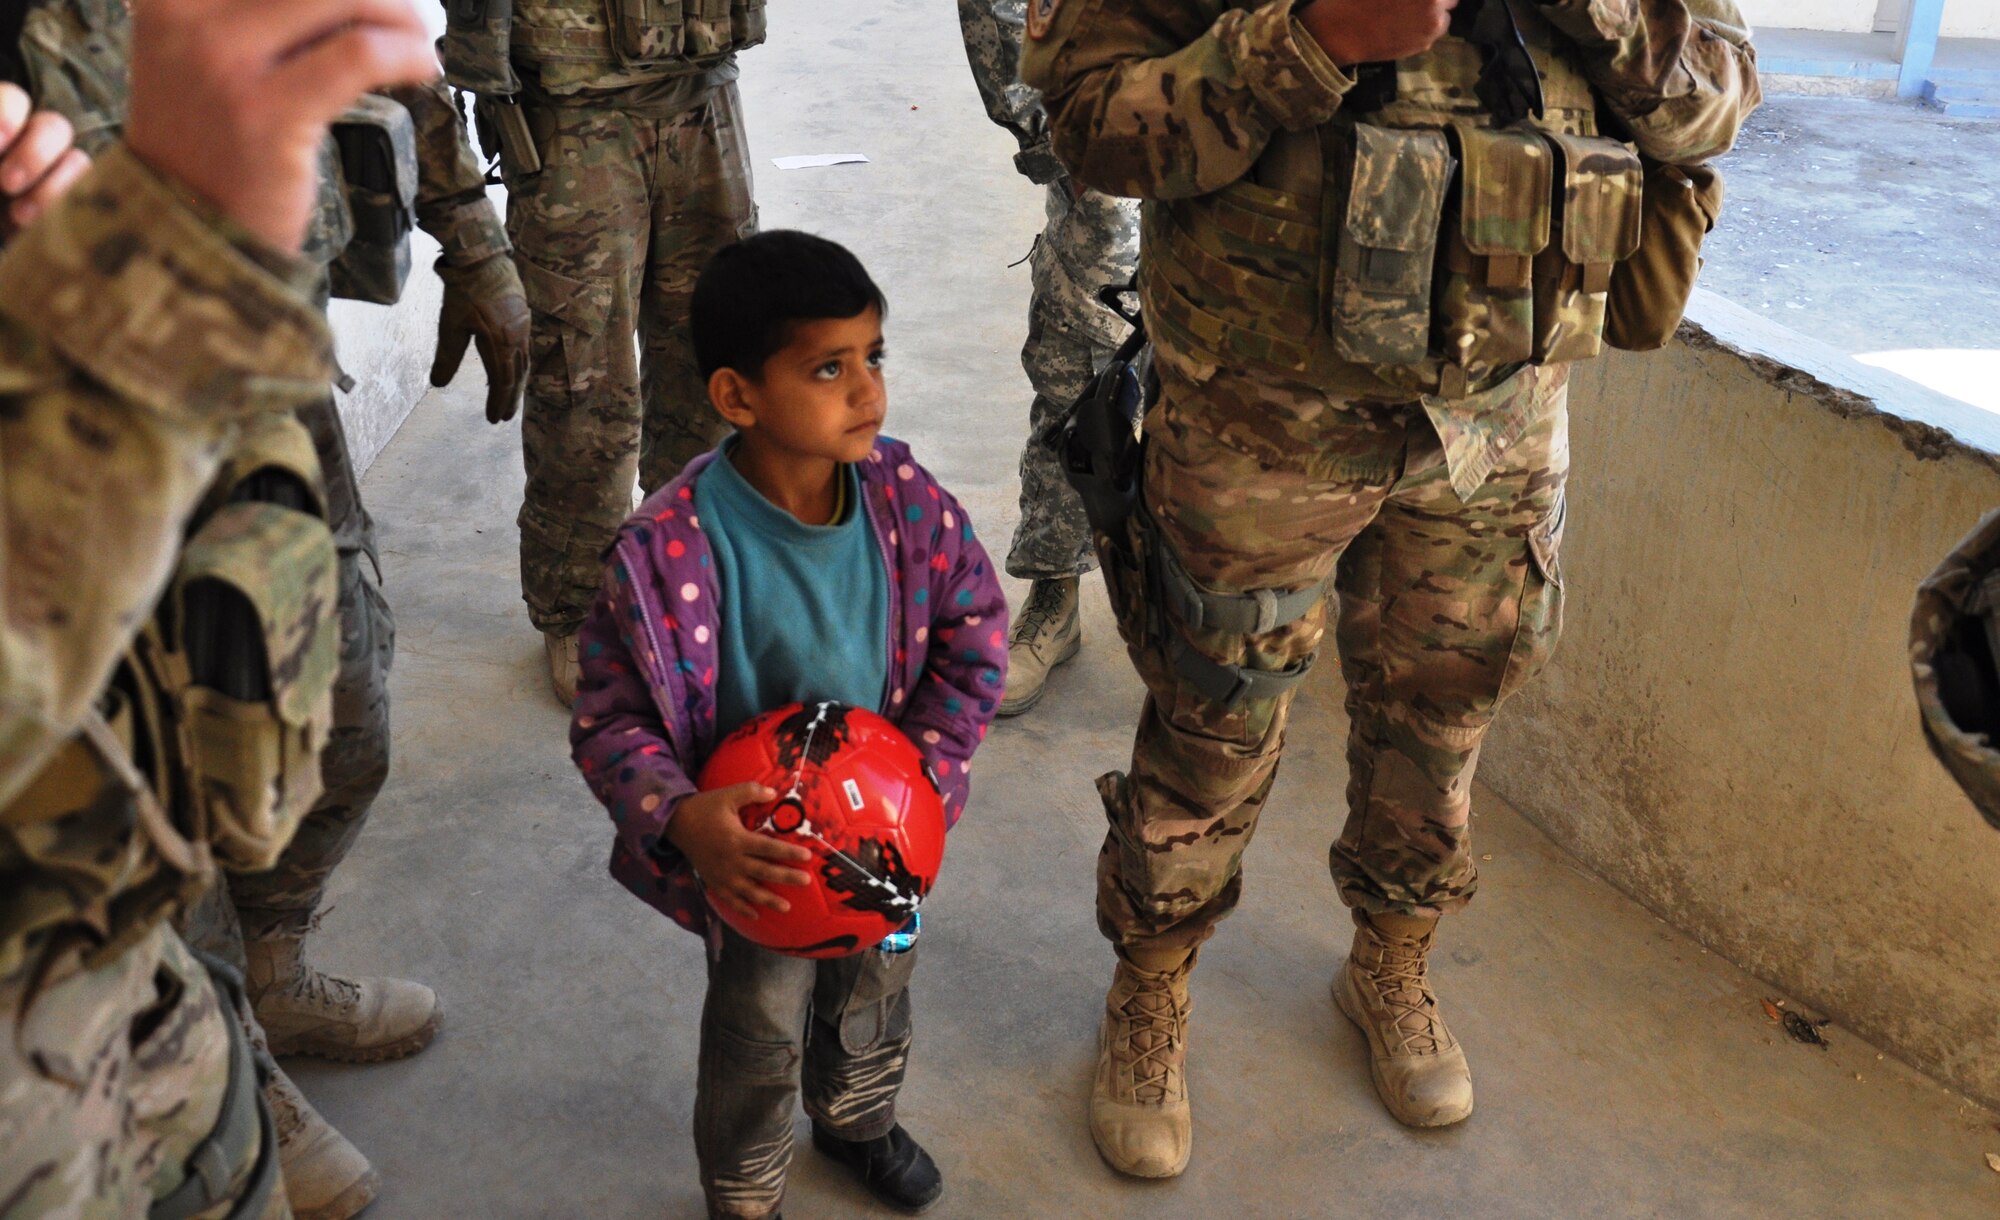 An Afghan student at a school near Kandahar Airfield holds a soccer ball he received from Afghan Air Force security forces airmen on Jan. 24. The mission to deliver supplies to the school was led by the Afghans and carried out with logistical and security support from Coalition forces. (U.S. Air Force photo/Capt. Tristan Hinderliter)